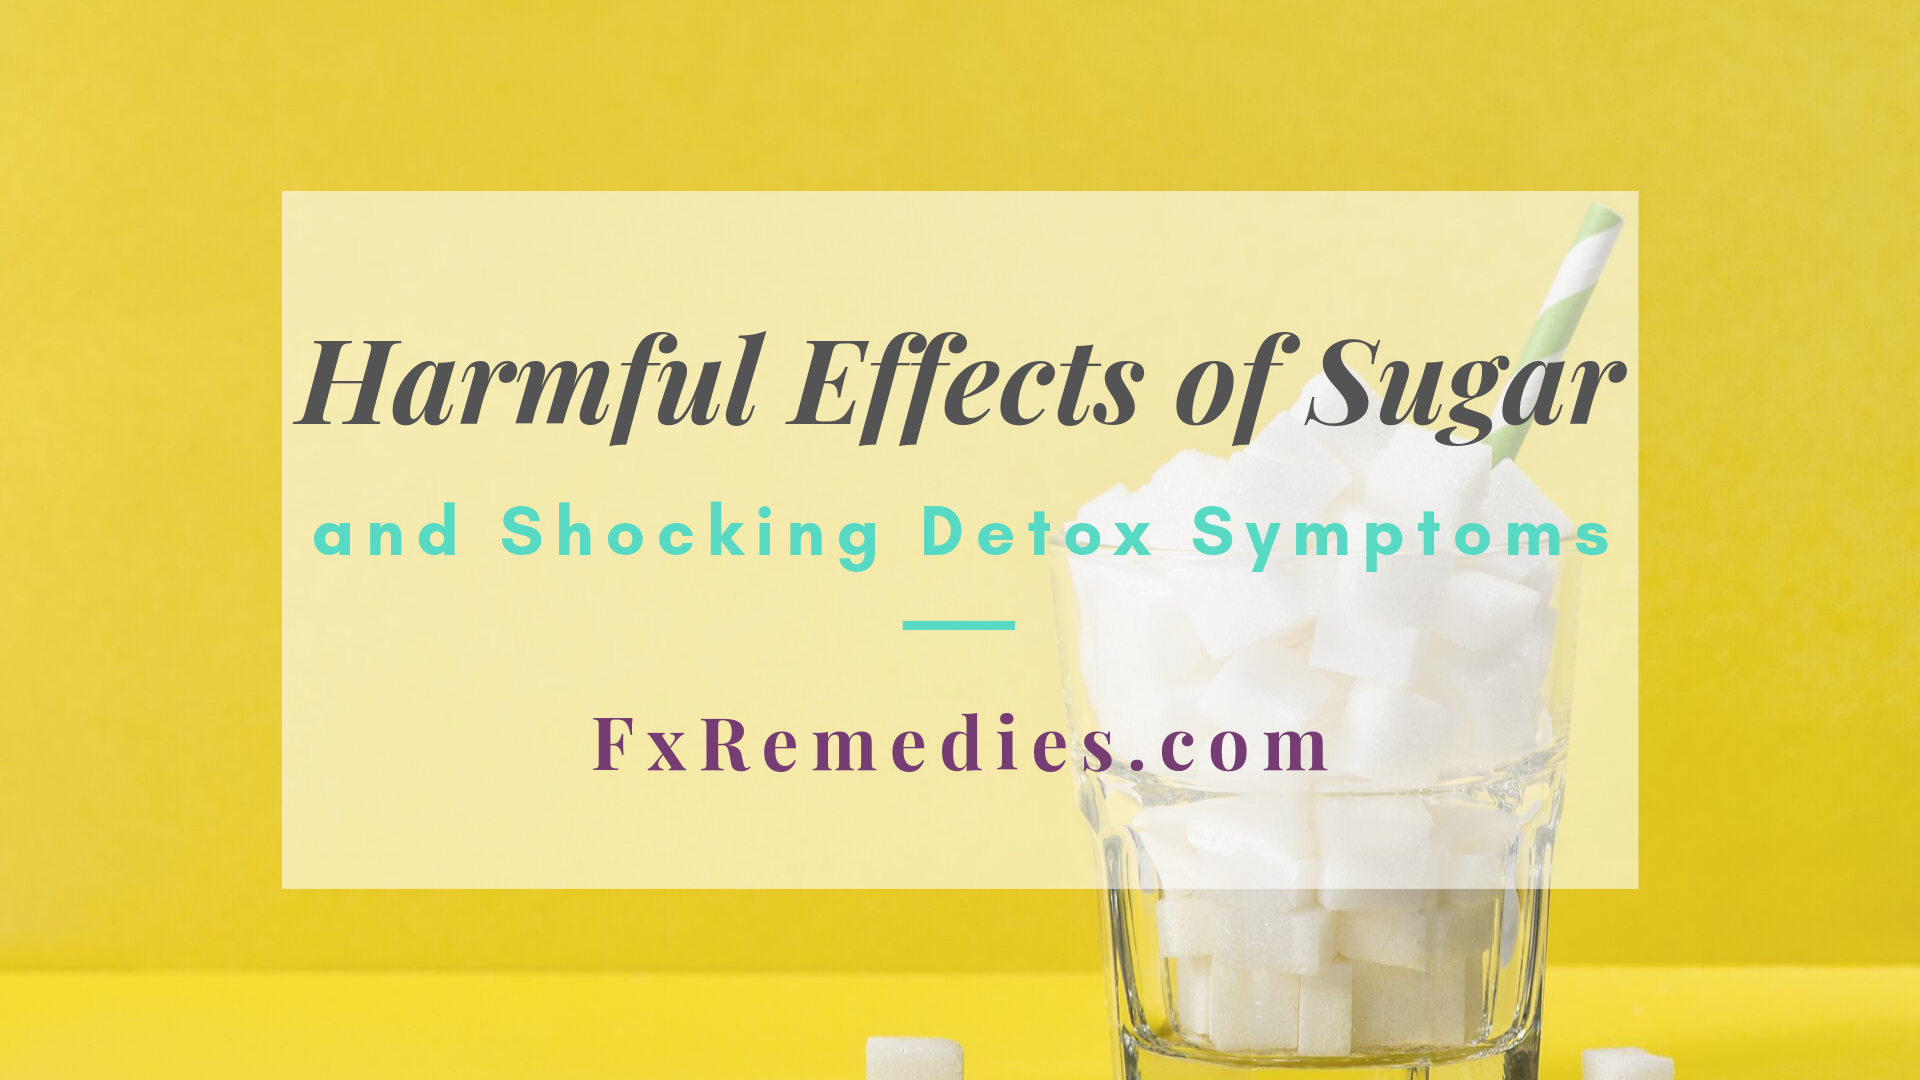 Don’t Think sugars bad for you? The harmful effects of sugar can be surprising for many.